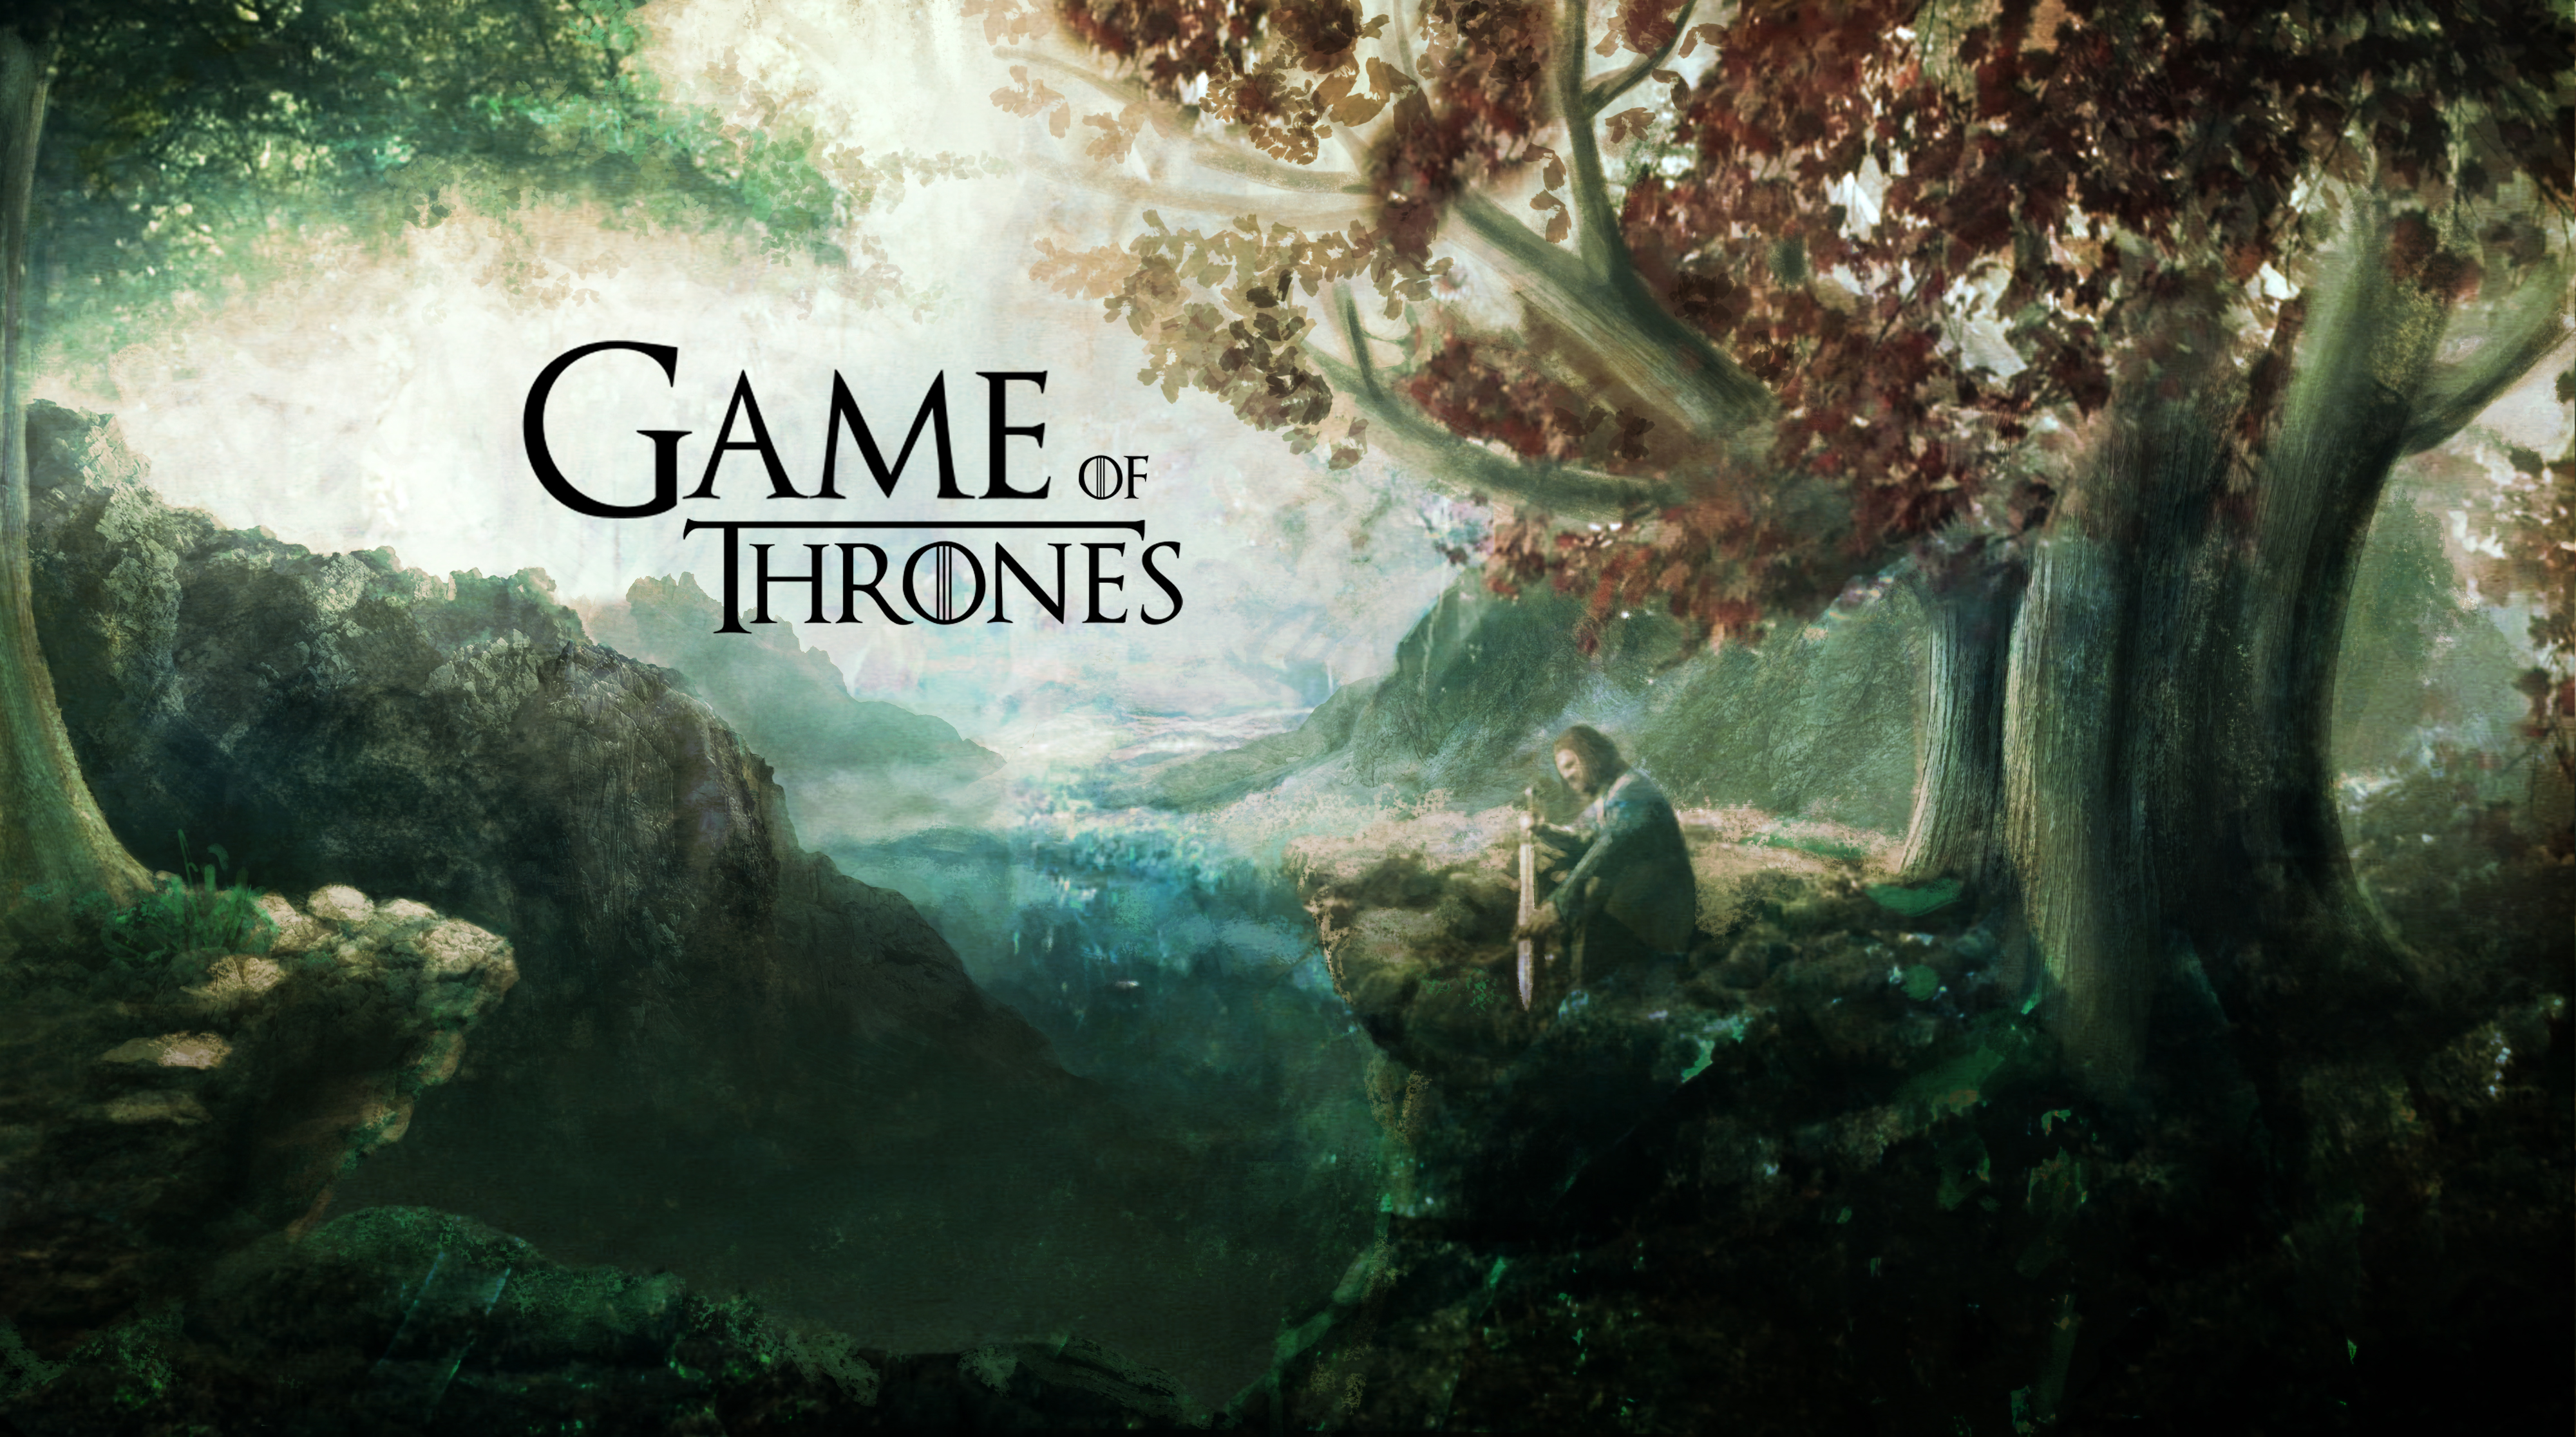 game of thrones season 3 all episodes free download